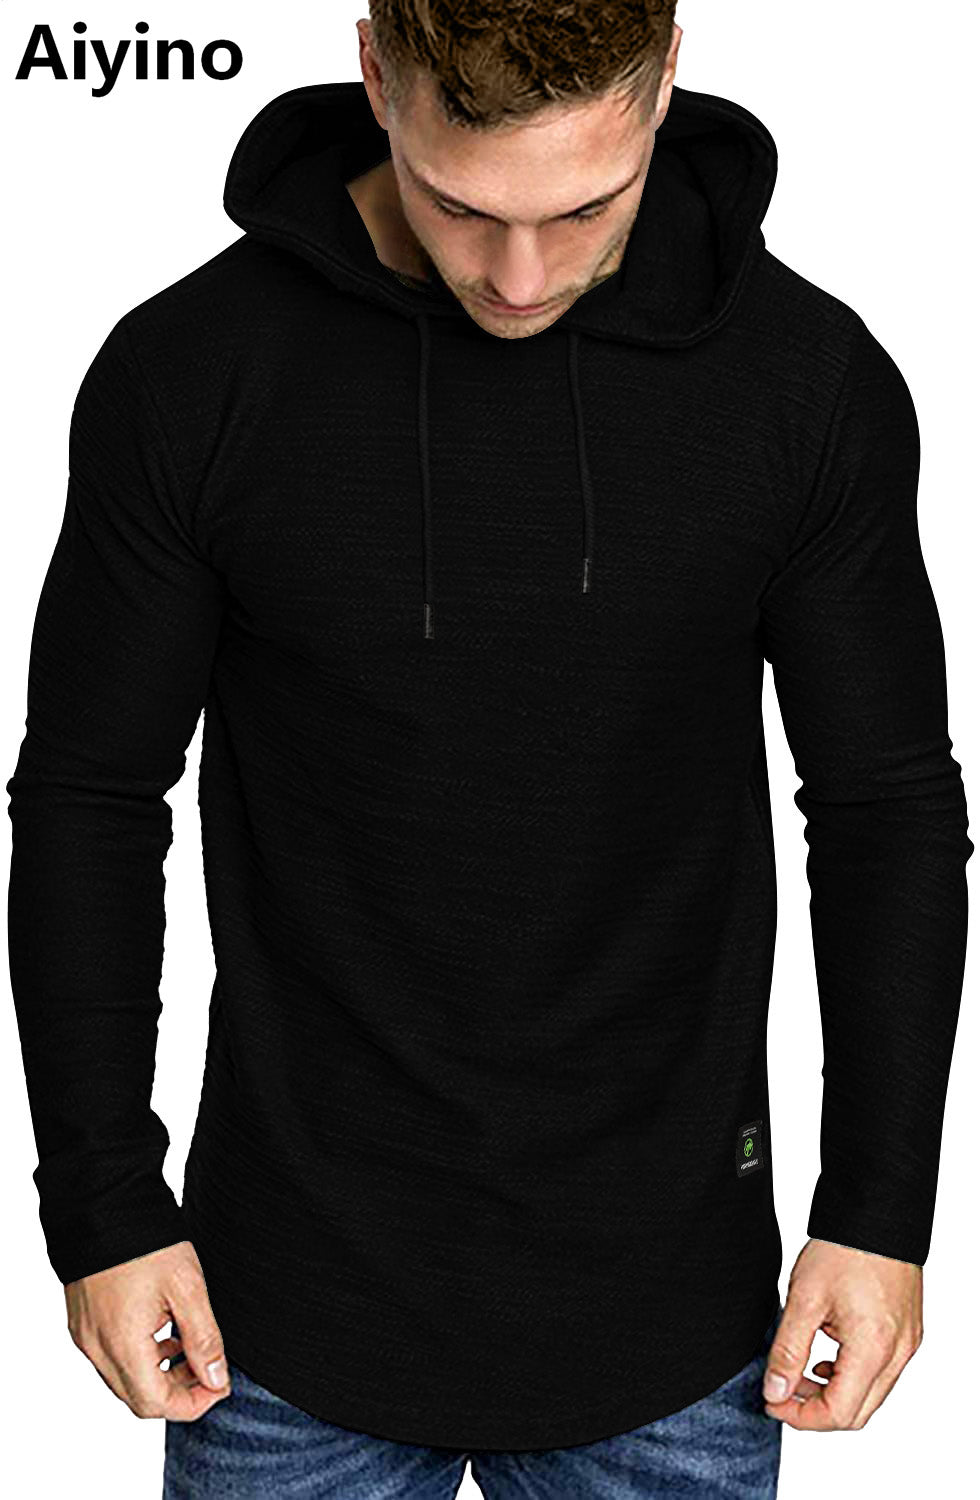 Aiyino Men's Long Sleeve Athletic Hoodies Sport Sweatshirt Solid Color Fashion Pullover